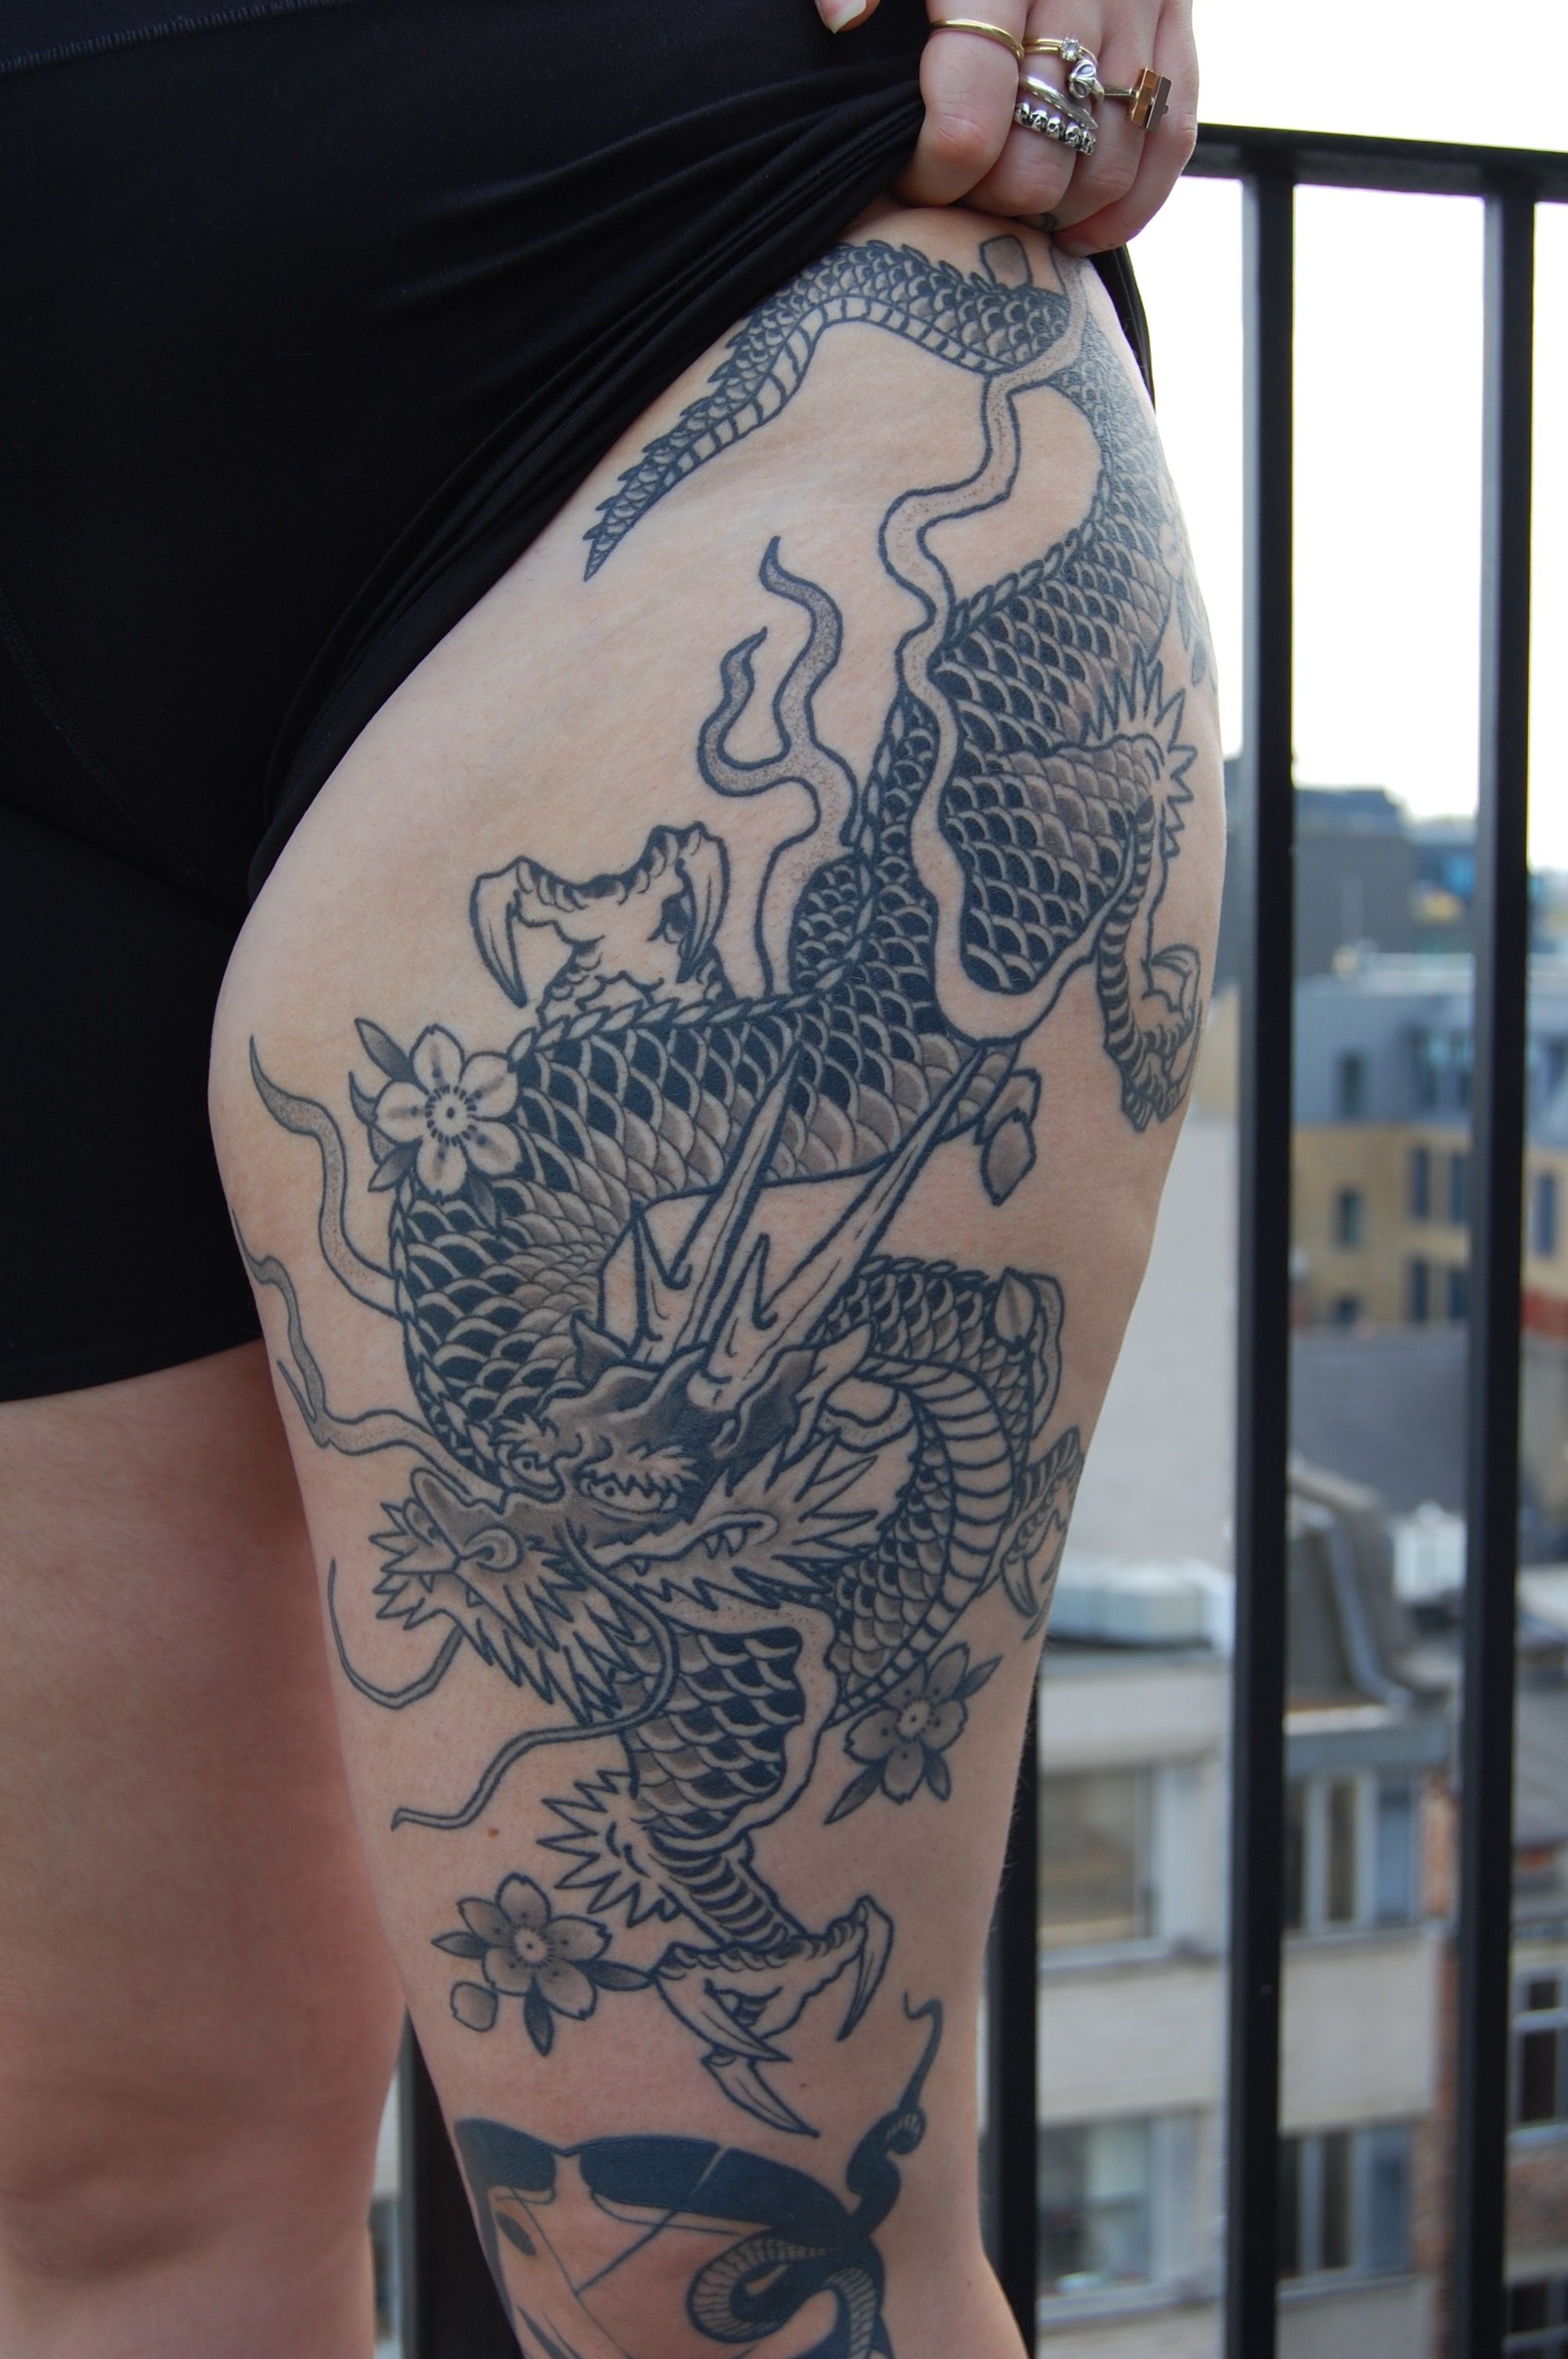 Tattoo tagged with: small, patriotic, single needle, japanese culture, tiny,  ifttt, little, drag, inner forearm, medium size, samurai | inked-app.com